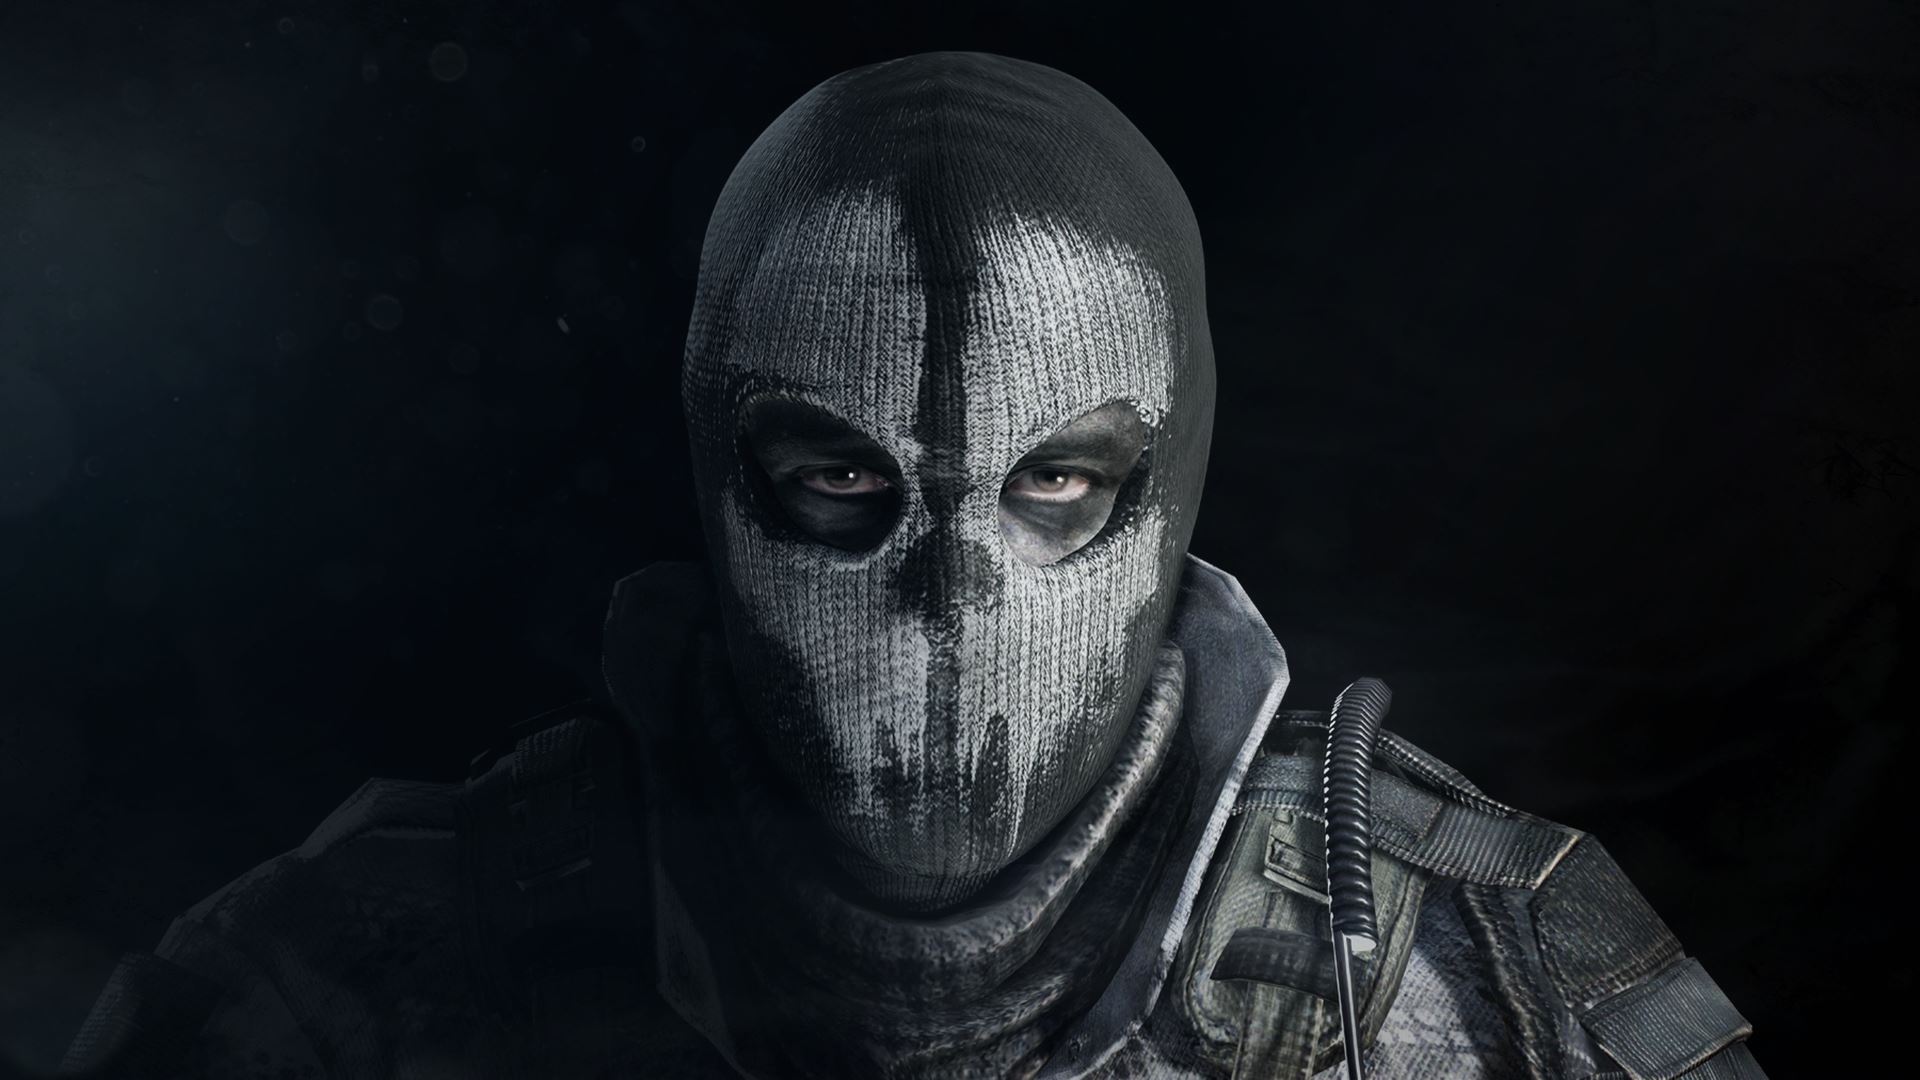 Ghosthrob: Going behind the mask with Call of Duty's Most Eligible Bachelor